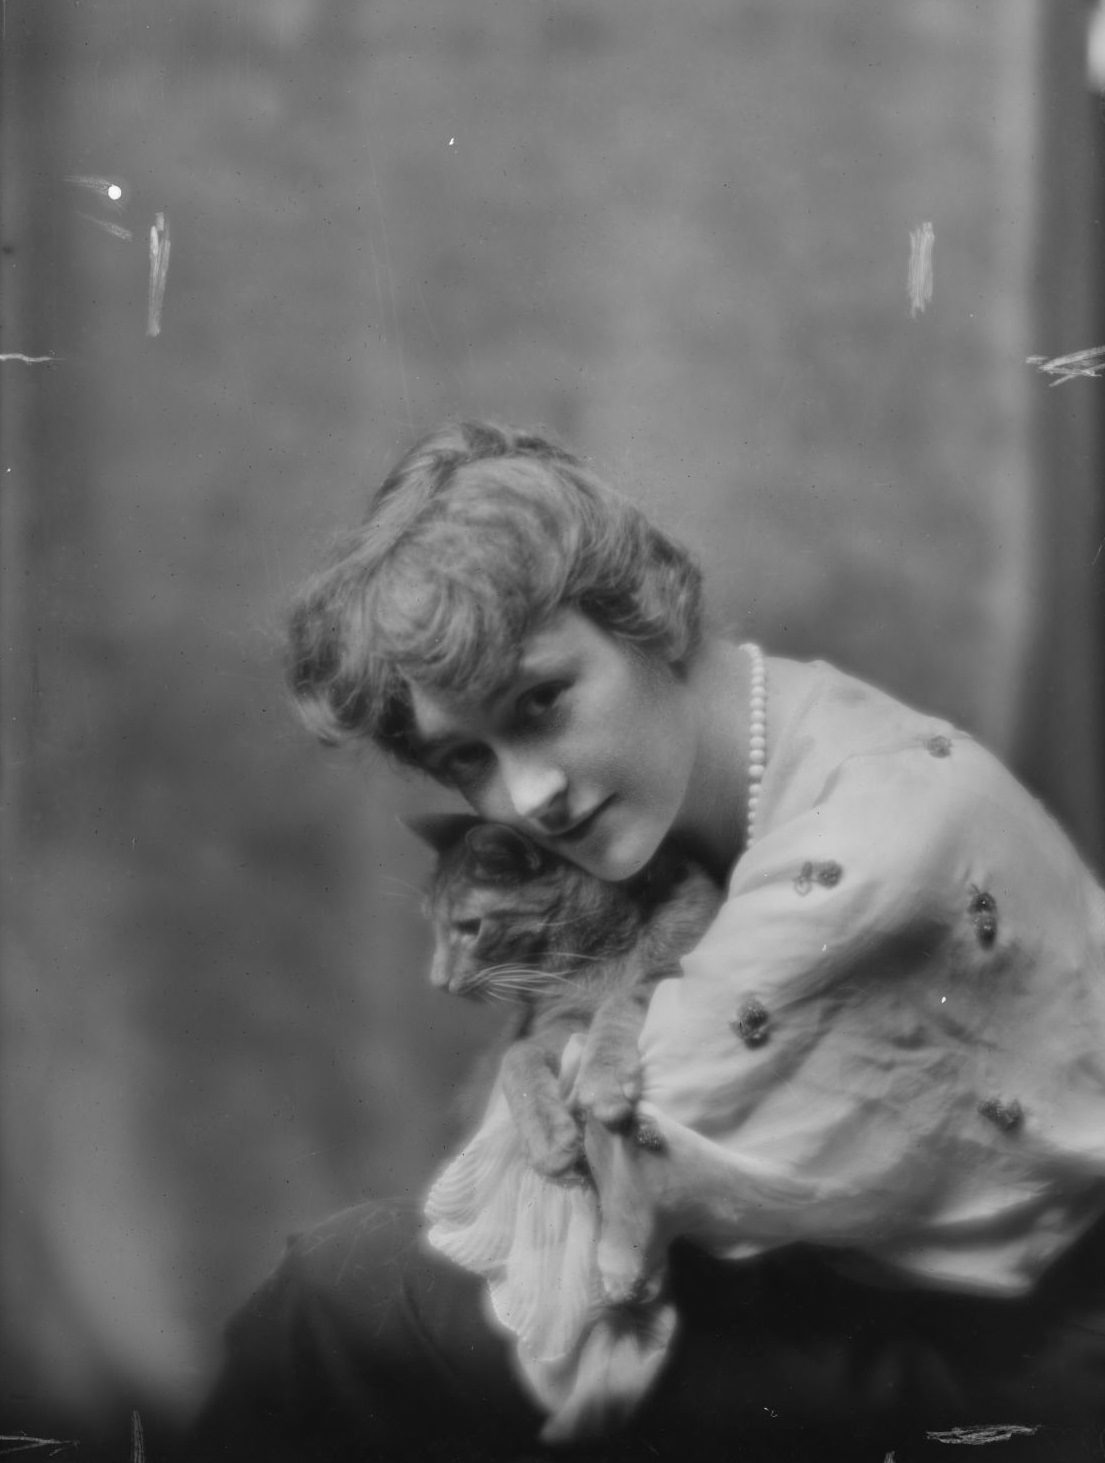 Buzzer the Studio Cat: A Photographer Used His Cuddly Cat as Adorable Prop In the 1900s